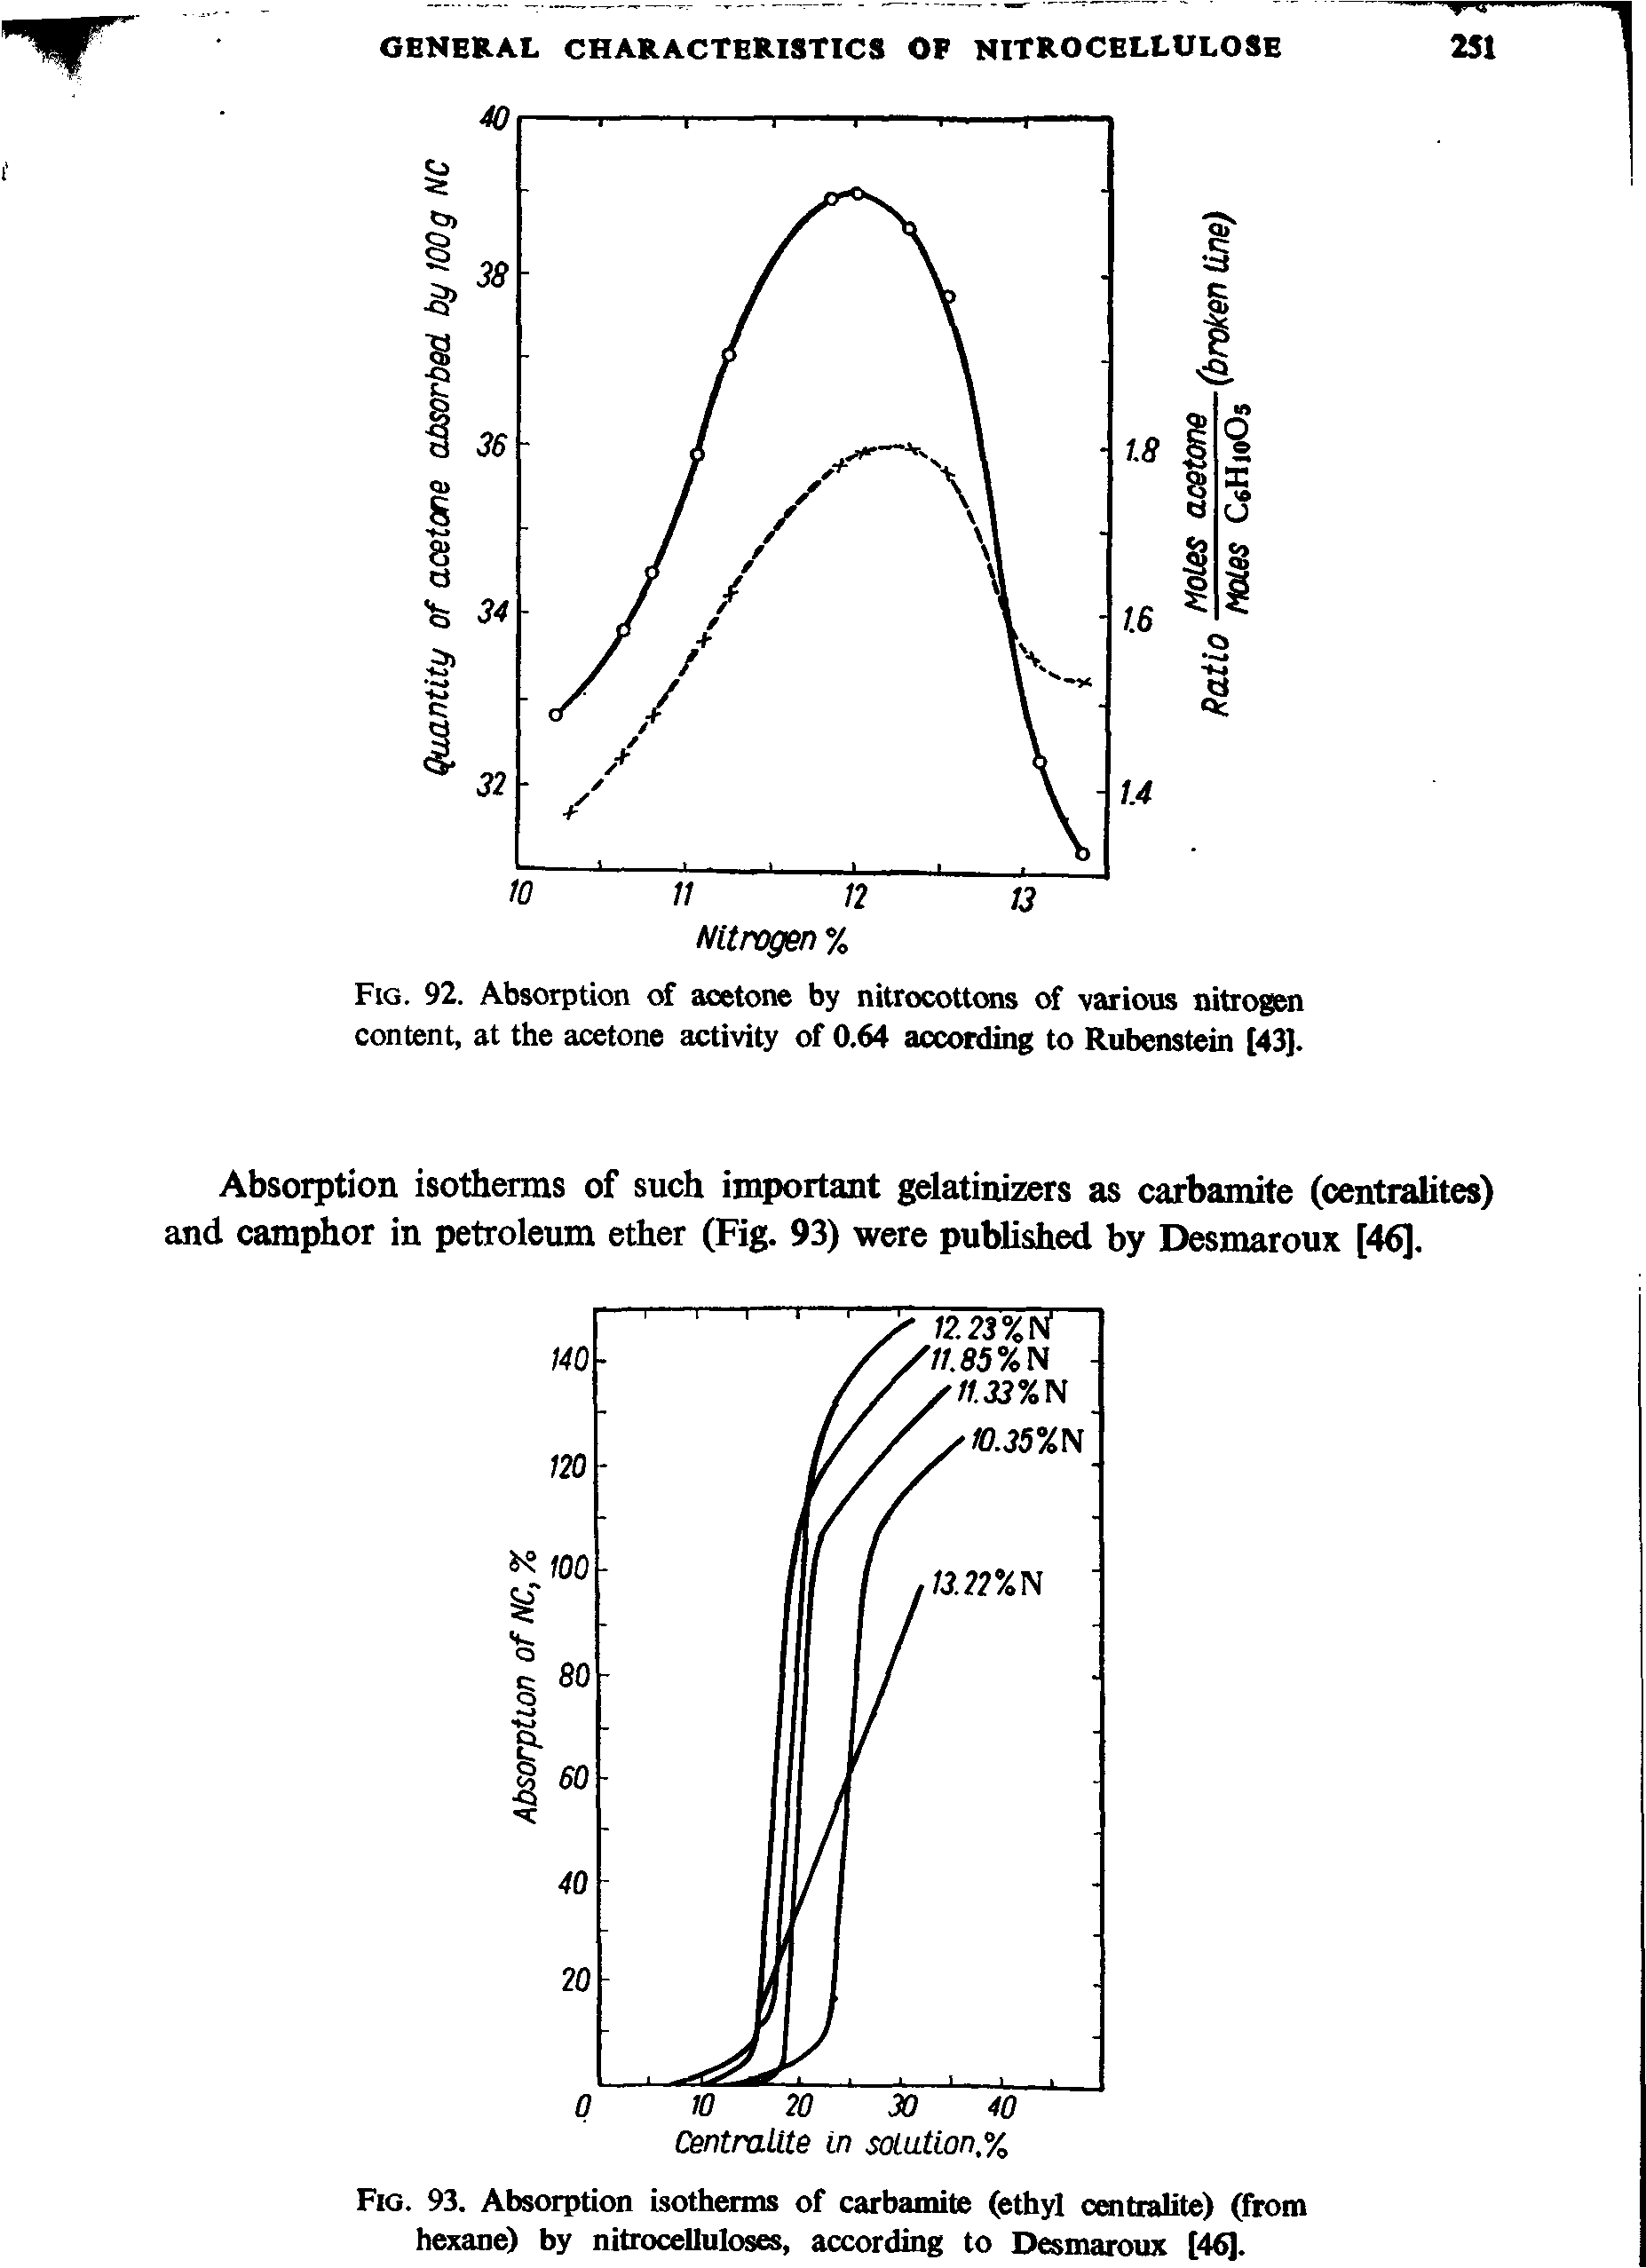 Fig. 93. Absorption isotherms of carbamite (ethyl centralite) (from hexane) by nitrocelluloses, according to Desmaroux [46].